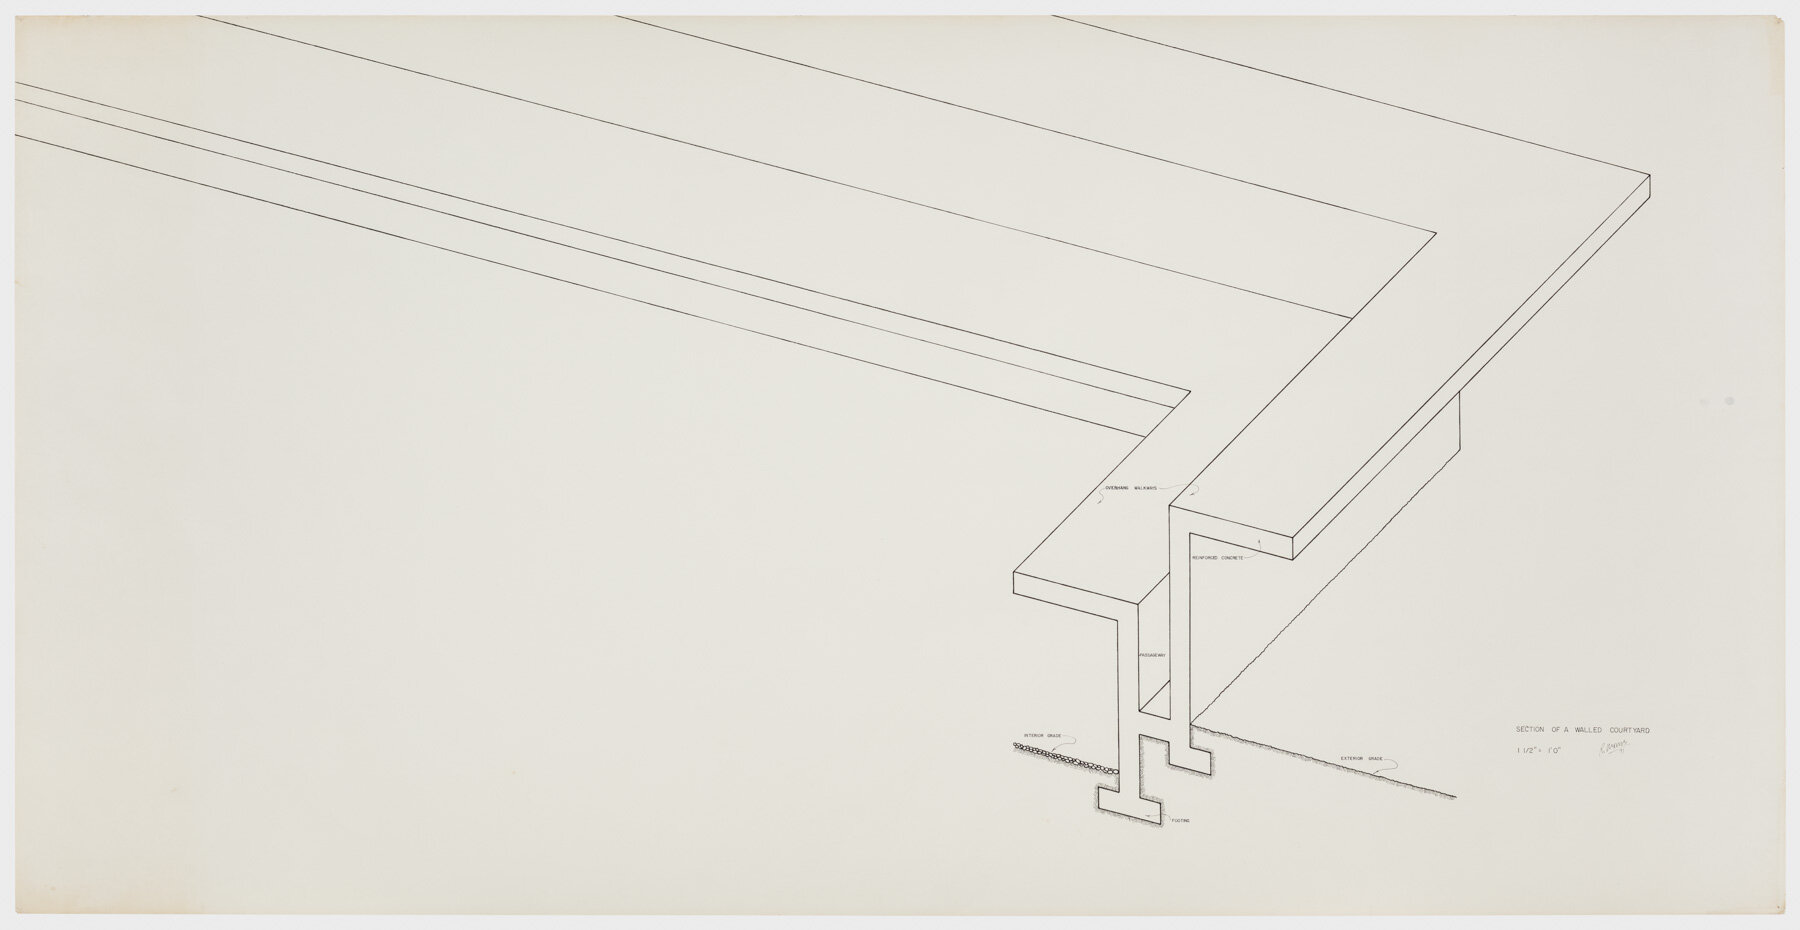  Robert Morris. Section of a Walled Courtyard, 1971. Ink on paper,42 x 84 in. (107 x 213 cm). Courtesy of Hunter College, The City University of New York. © 2019 The Estate of Robert Morris / Artists Rights Society (ARS), New York. Photo: Stan Narten